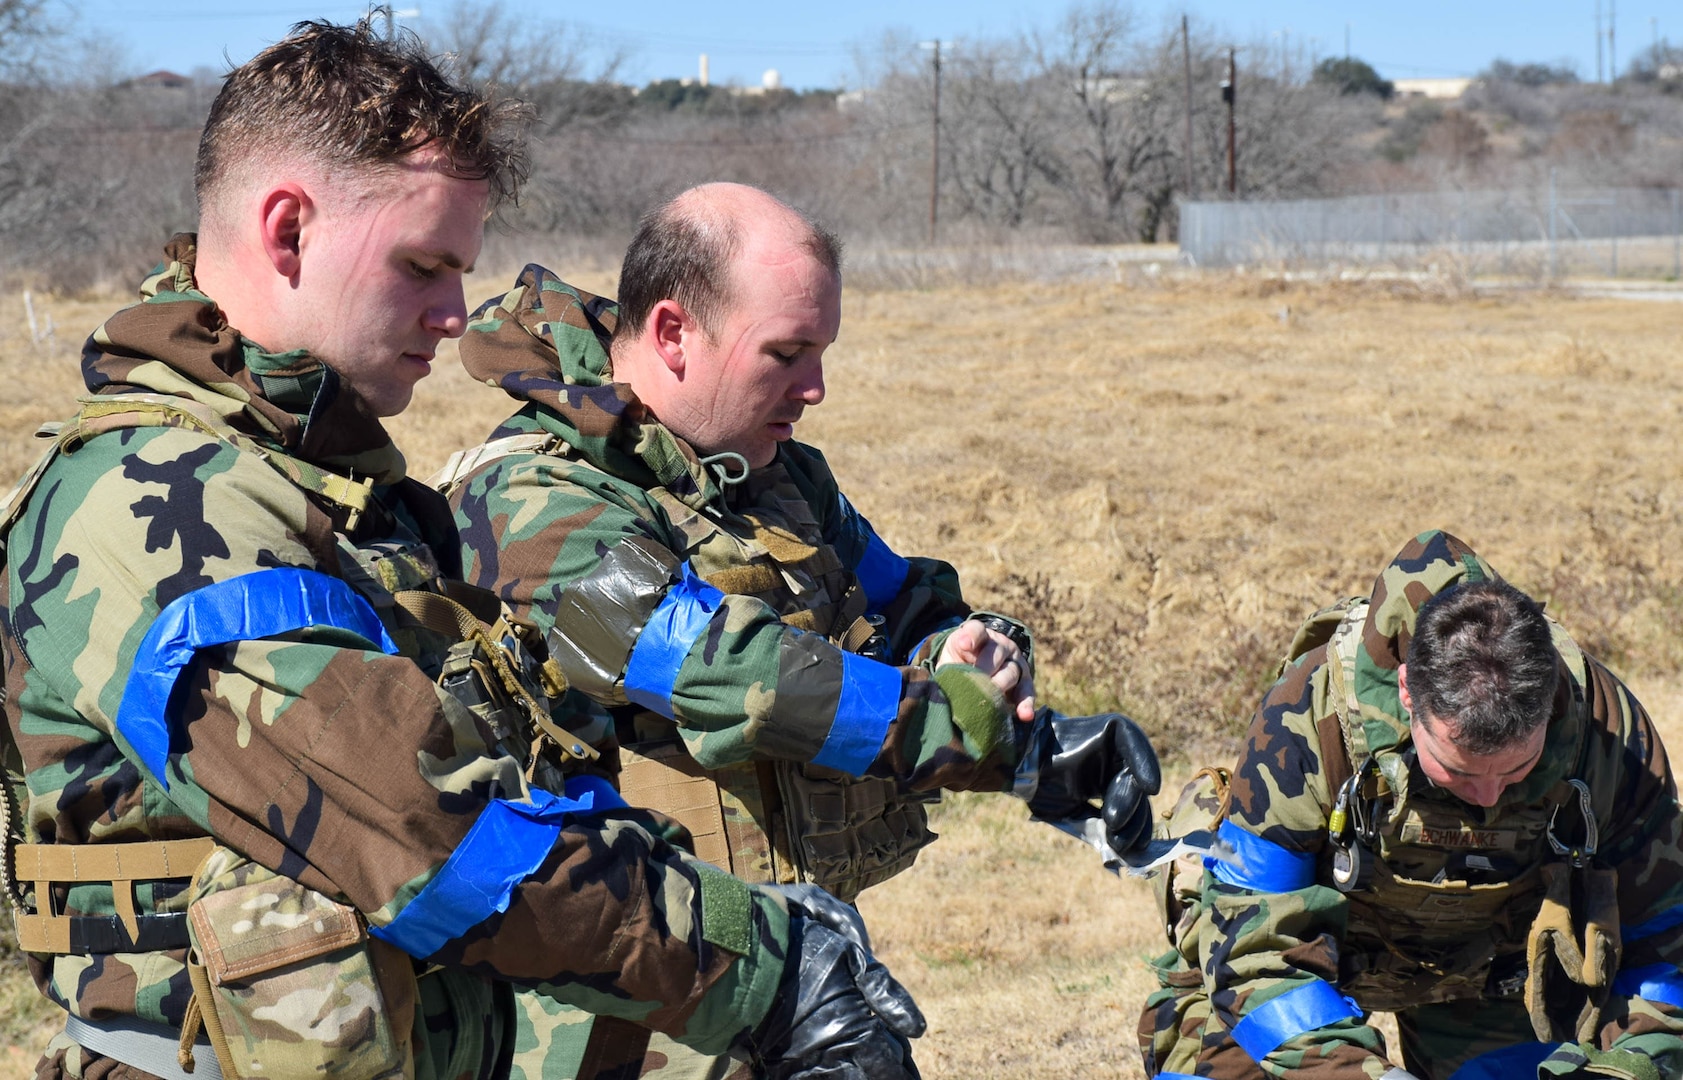 Explosive ordnance disposal technicians from the 433rd Civil Engineer Squadron, (left to right) Staff Sgt. Kendall Greer, Tech. Sgt. Brian Cole and Staff Sgt. David Schwanke, remove chemical protection gear during an exercise at Joint Base San Antonio-Lackland, Texas, Feb 9, 2022. (U.S. Air Force photo by Airman Mark Colmenares)